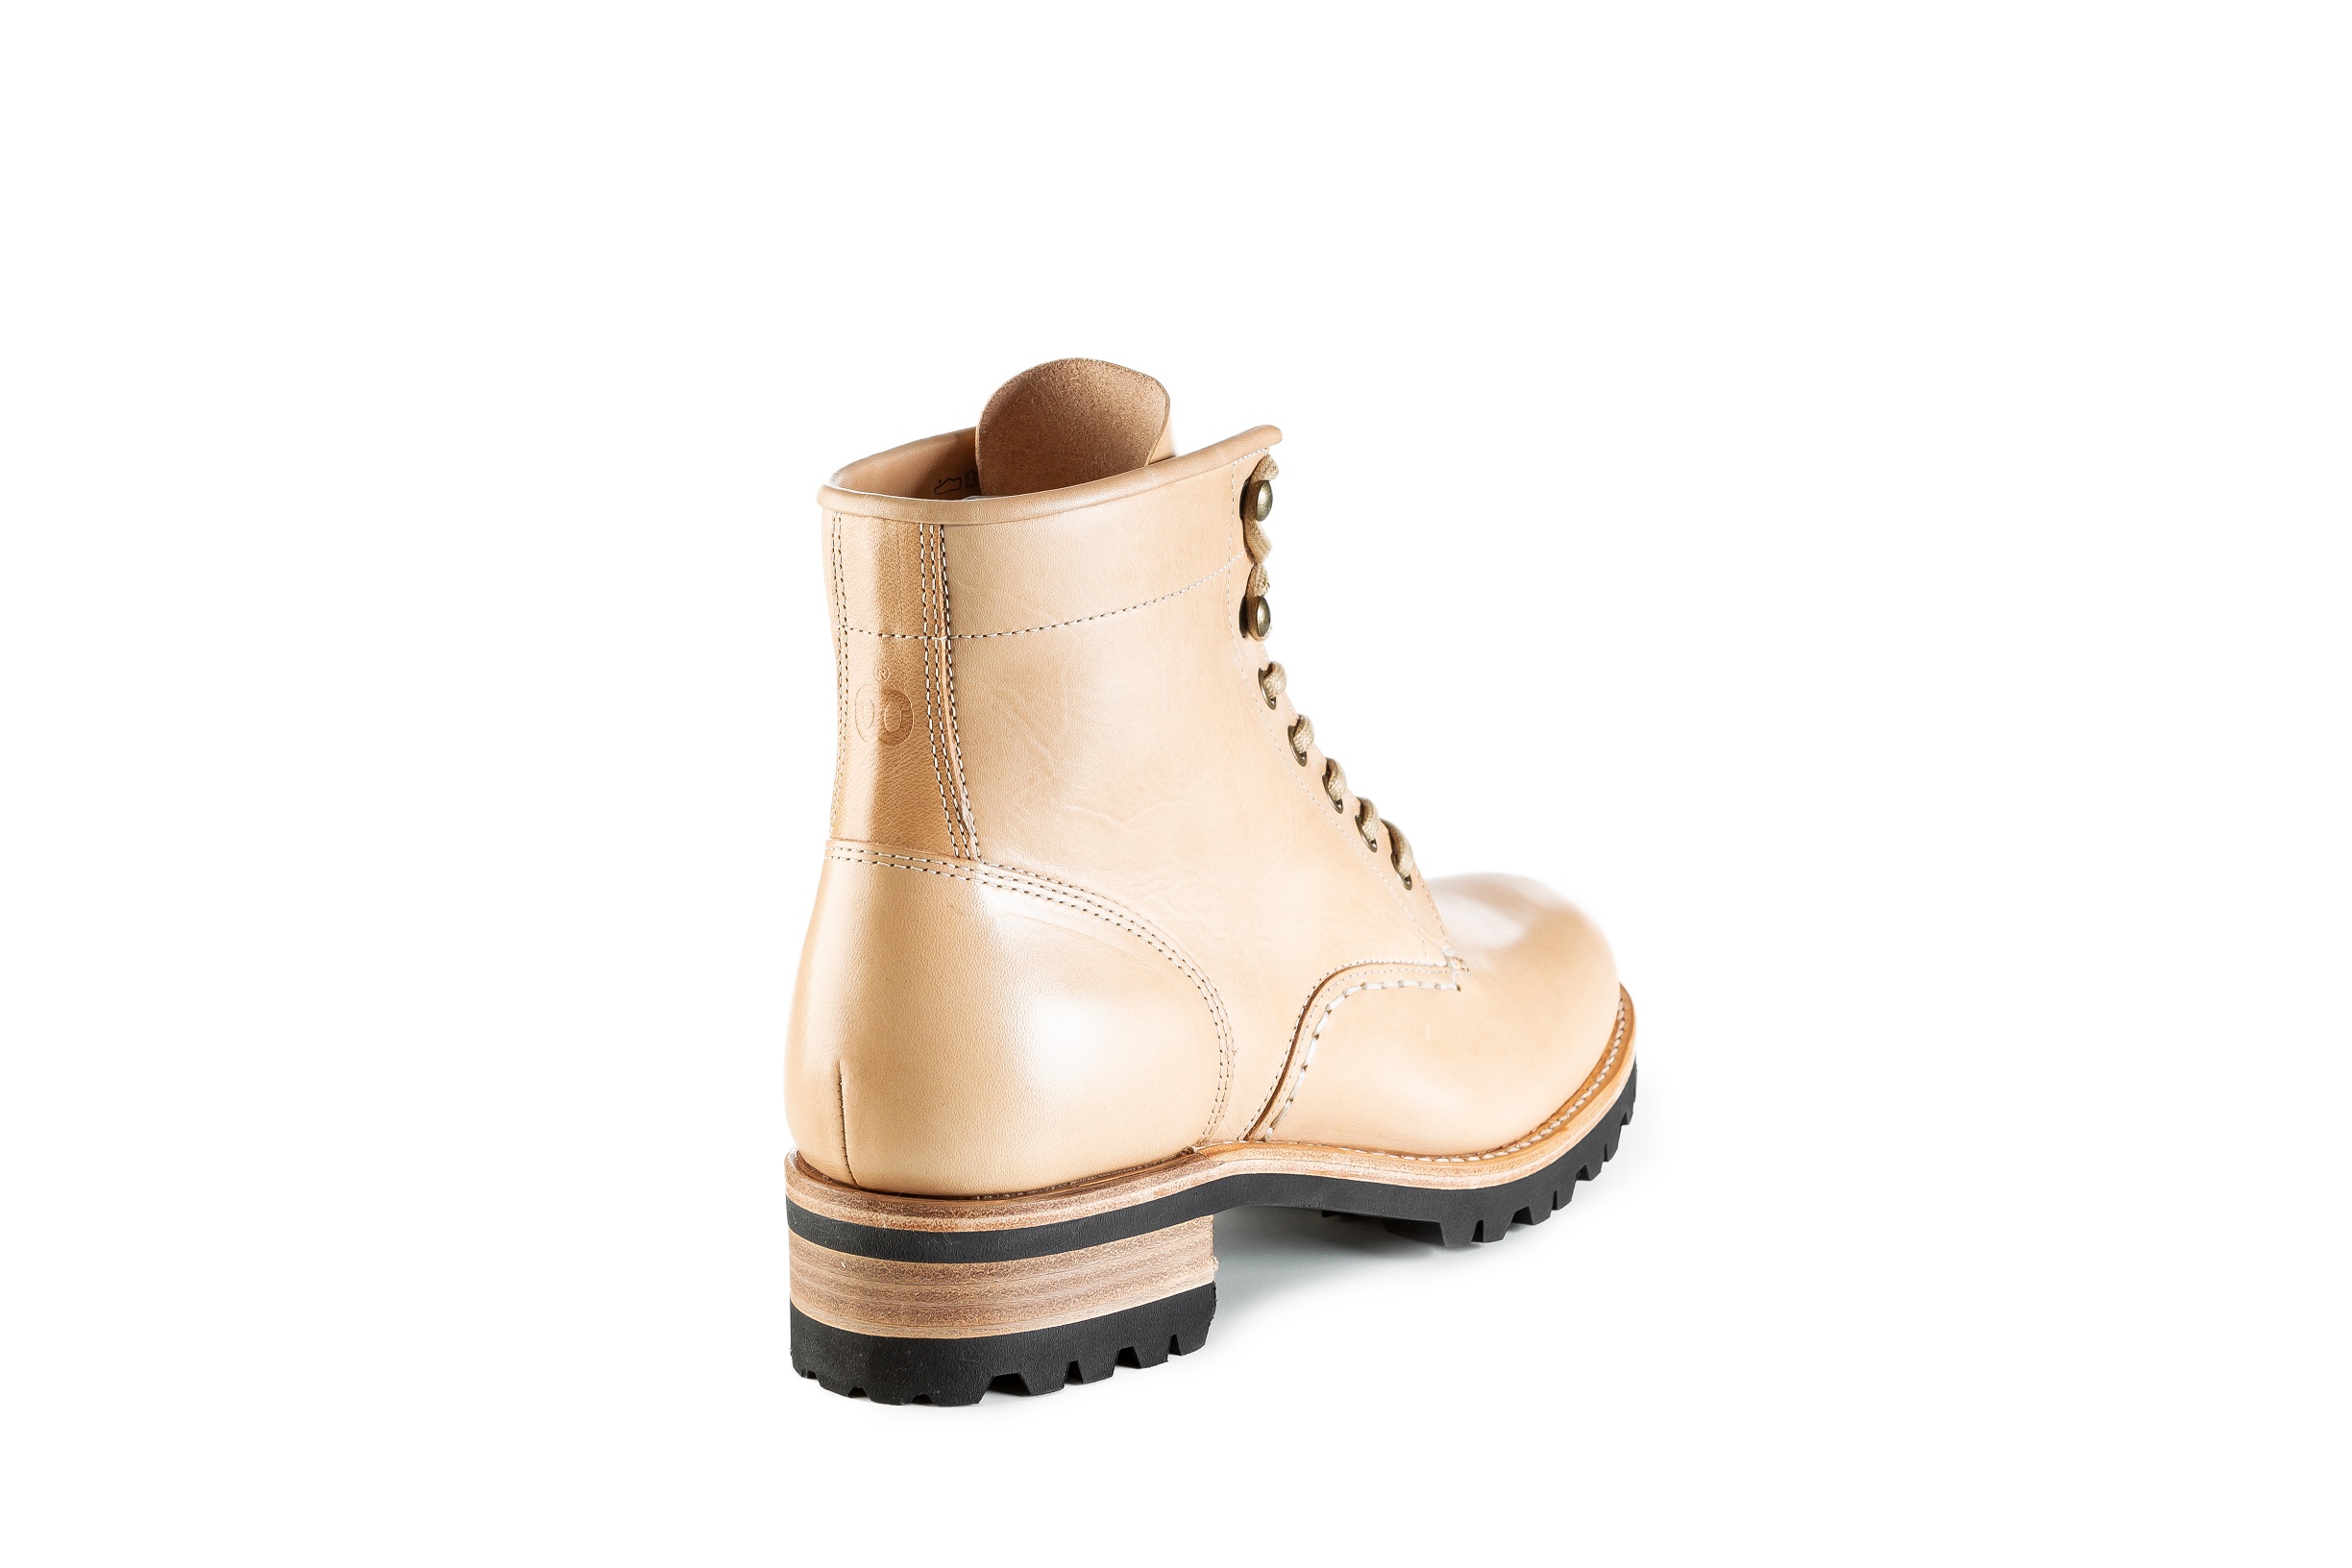 Heritage Boots - Goodyear Welted Footwear by Butts and Shoulders